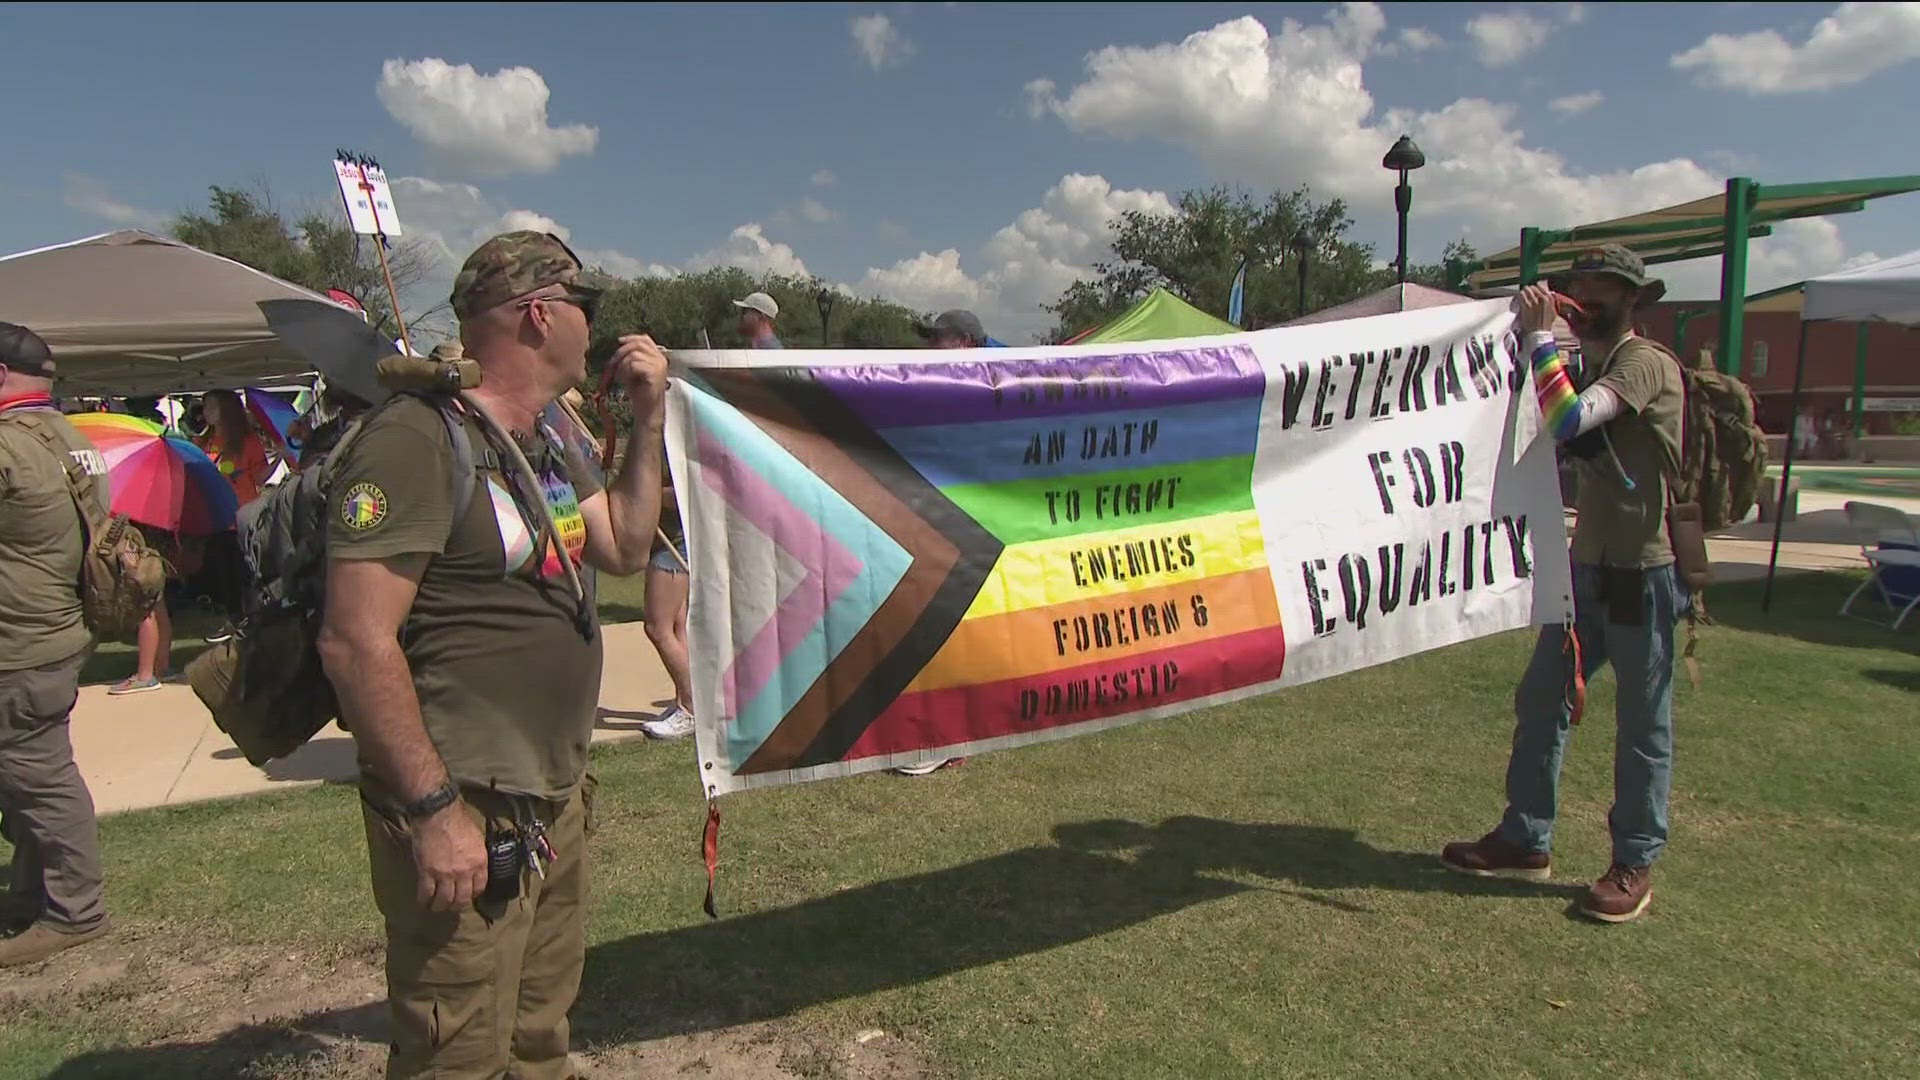 People in Taylor gathered for their annual Pride festival on Saturday, June 29. KVUE spoke with attendees about the importance of equality in small communities.